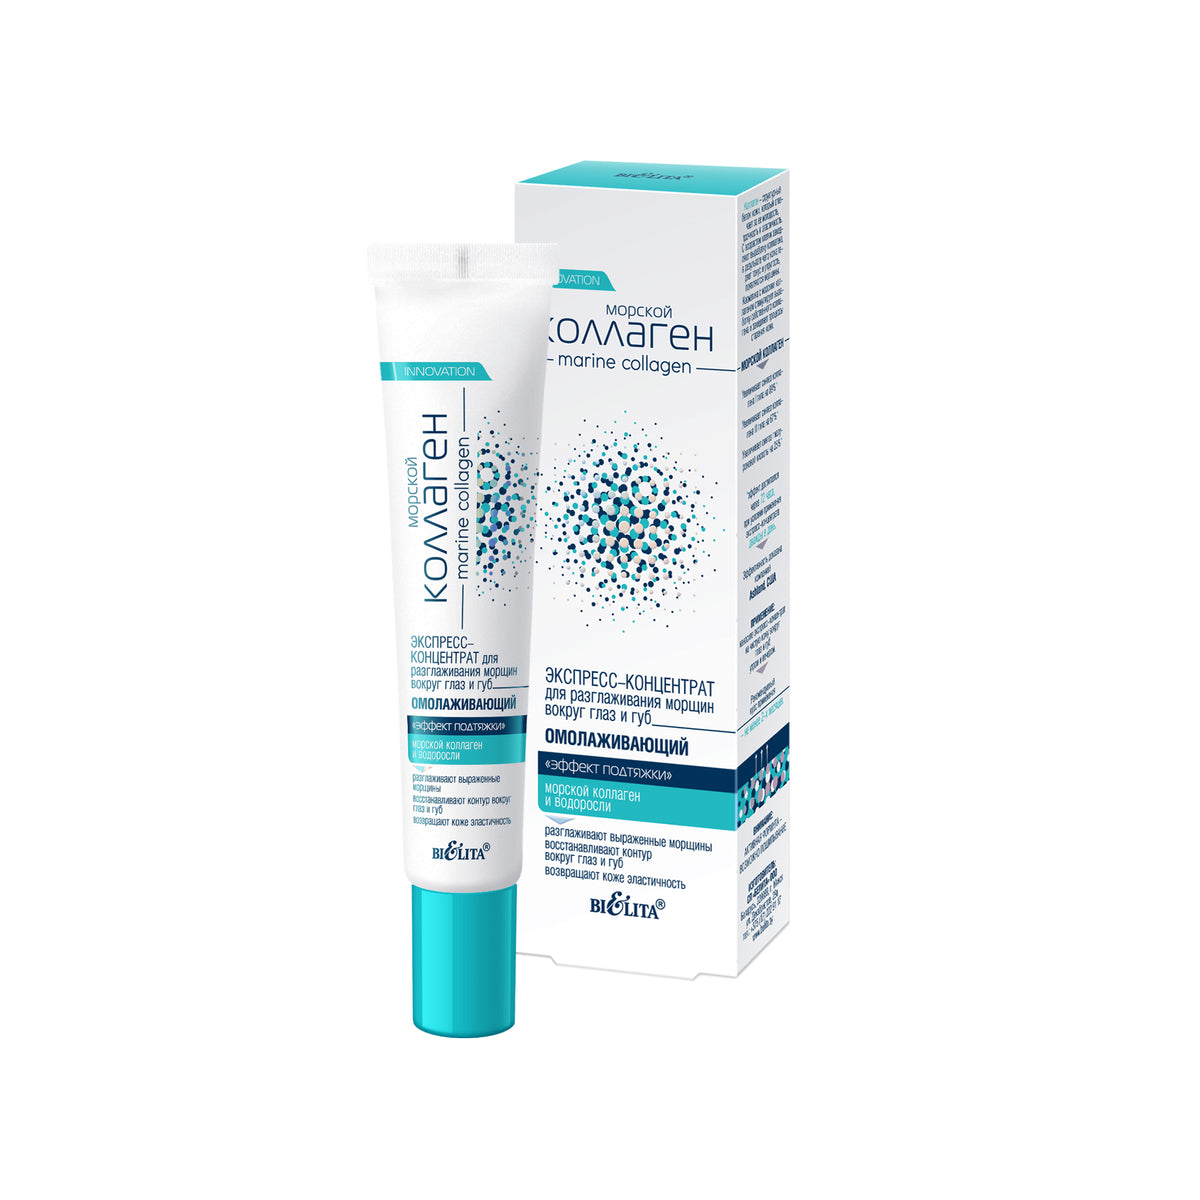 Smoothing CREAM-CONCENTRATE for face, neck and skin around the eyes 55+  from Vitex - shop online.